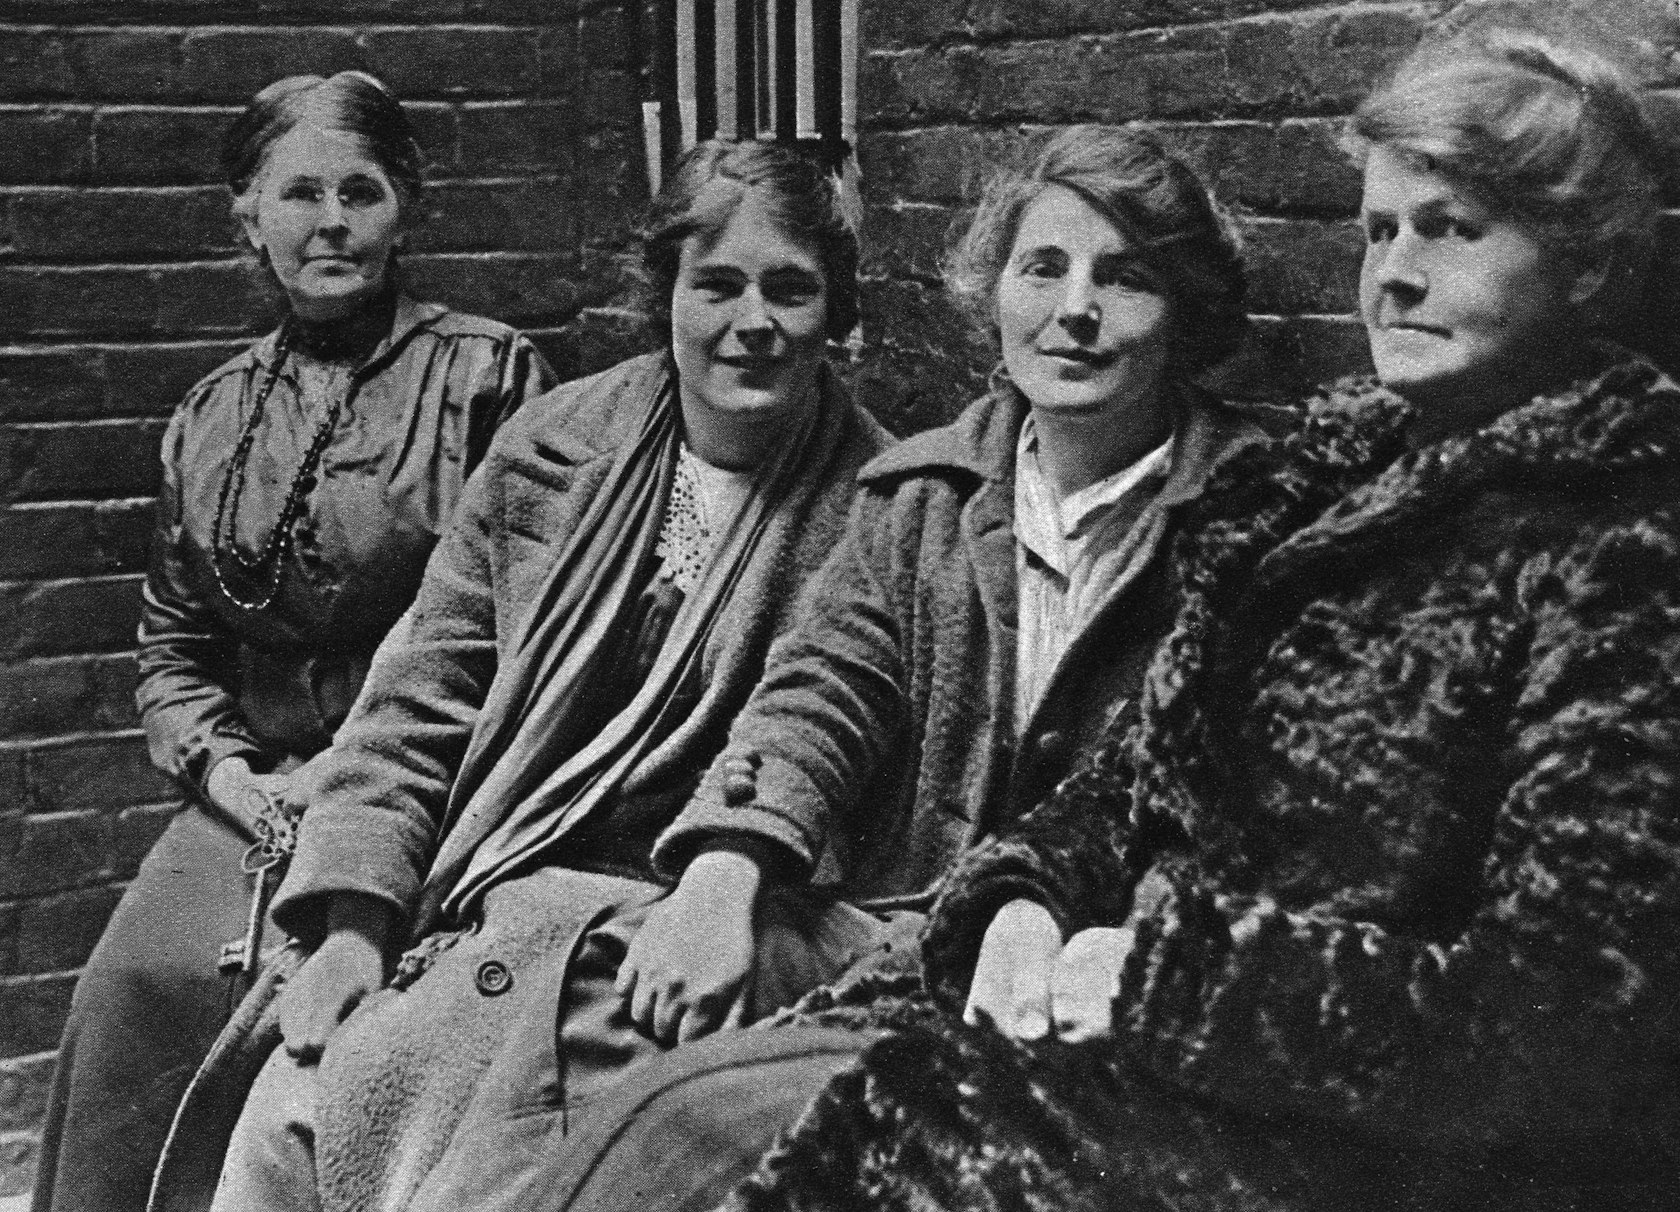 Alice Wheeldon (right), with daughters and Warder in custody 1916, Derby Police Court